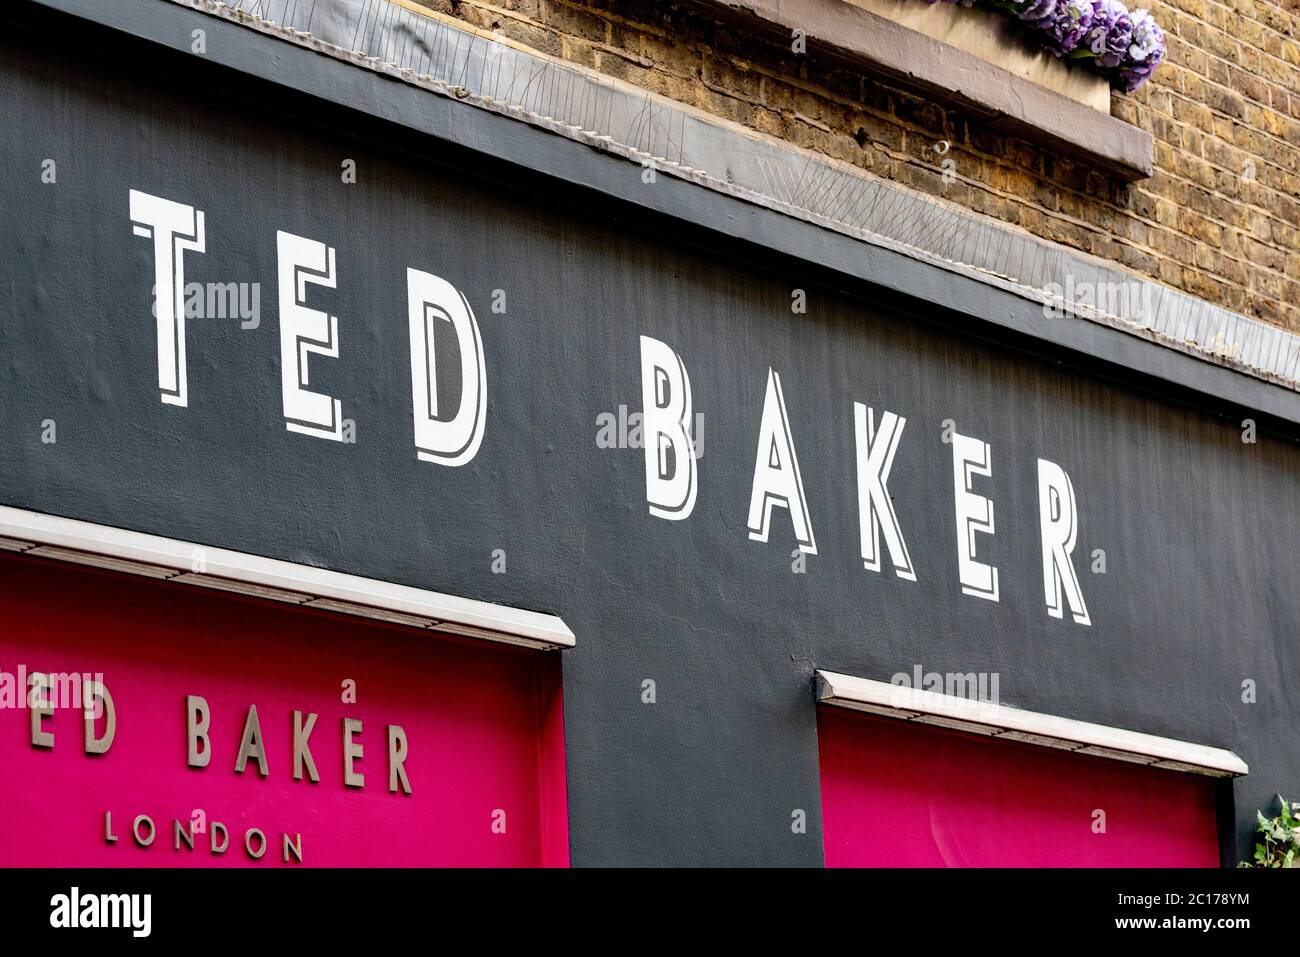 Ted Baker shop logo in Covent Garden Stock Photo - Alamy